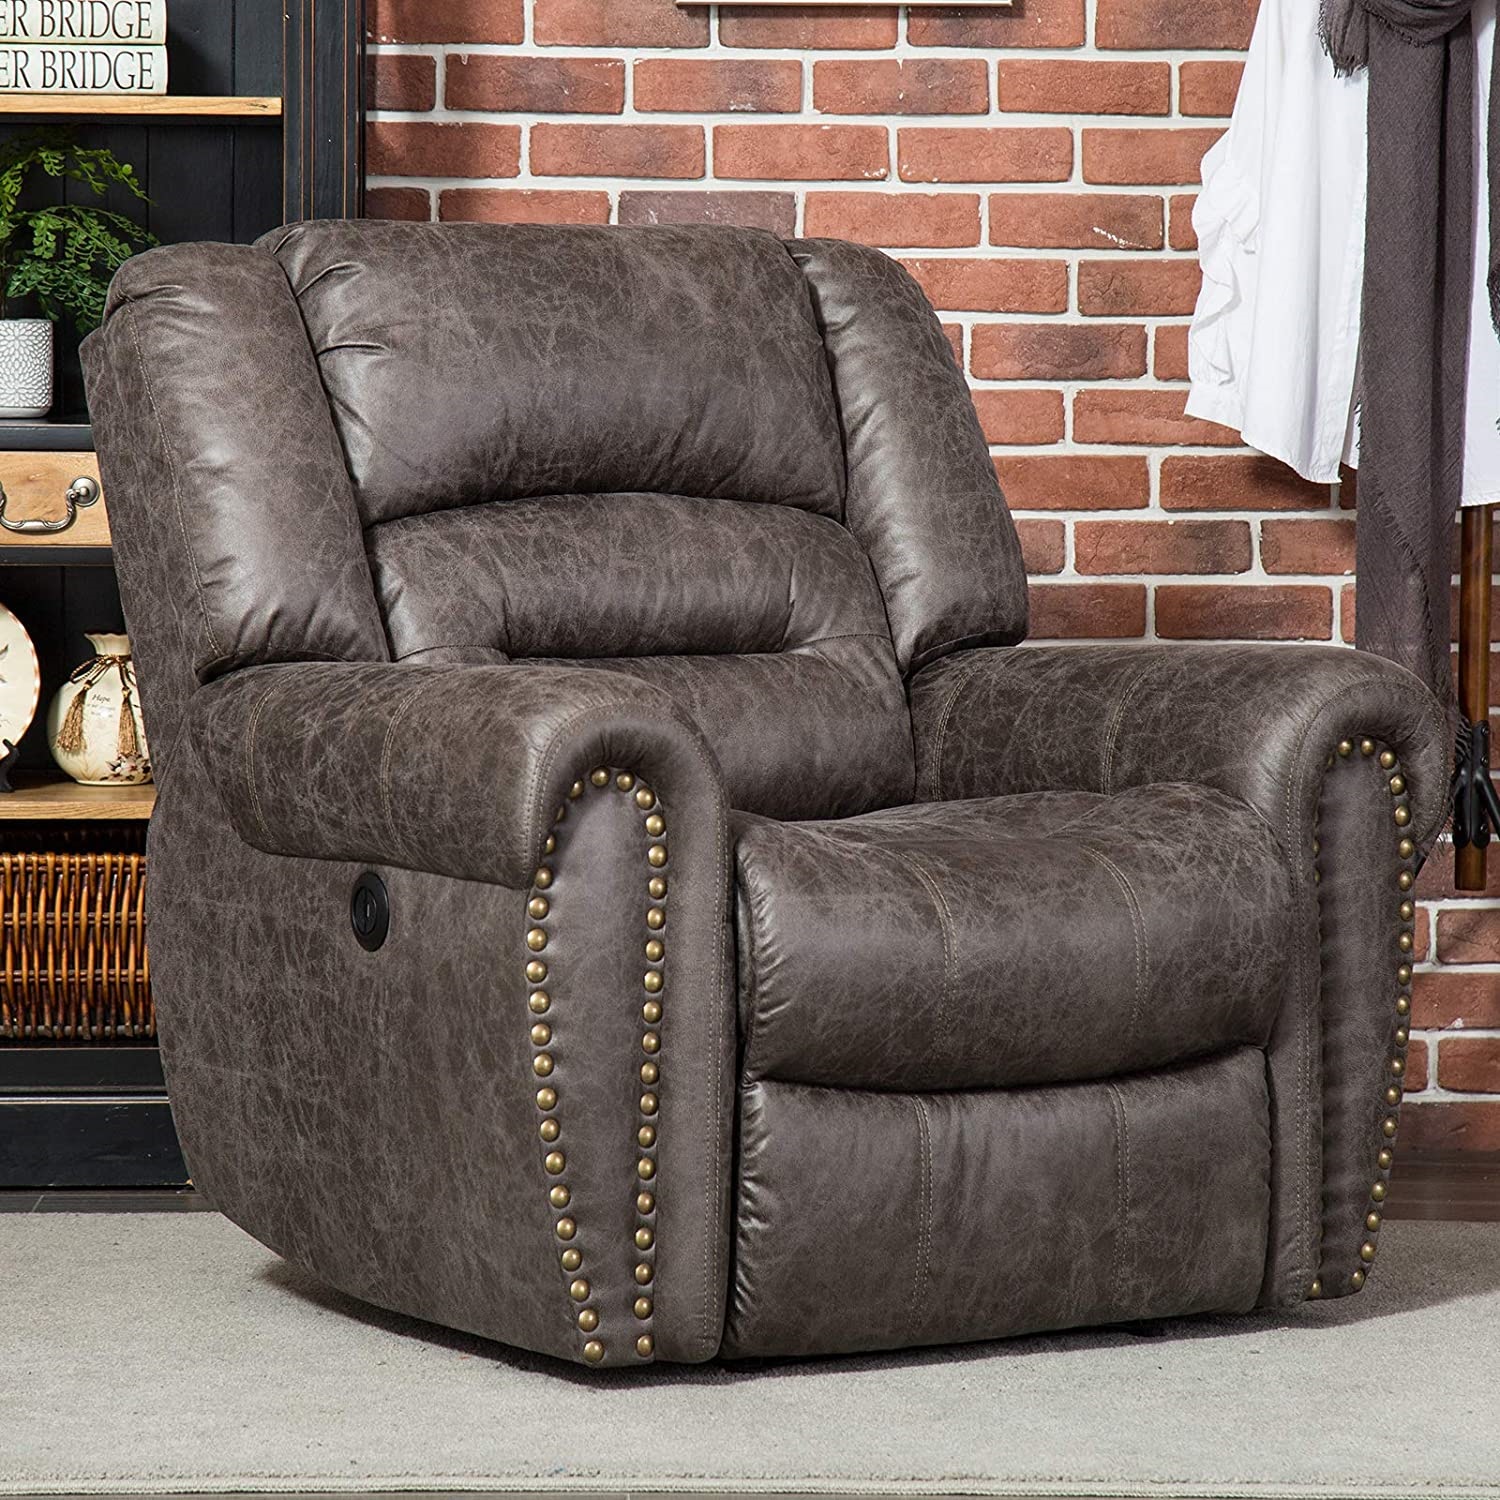 ANJ Electric Recliner Chair With Breathable Bonded Leather